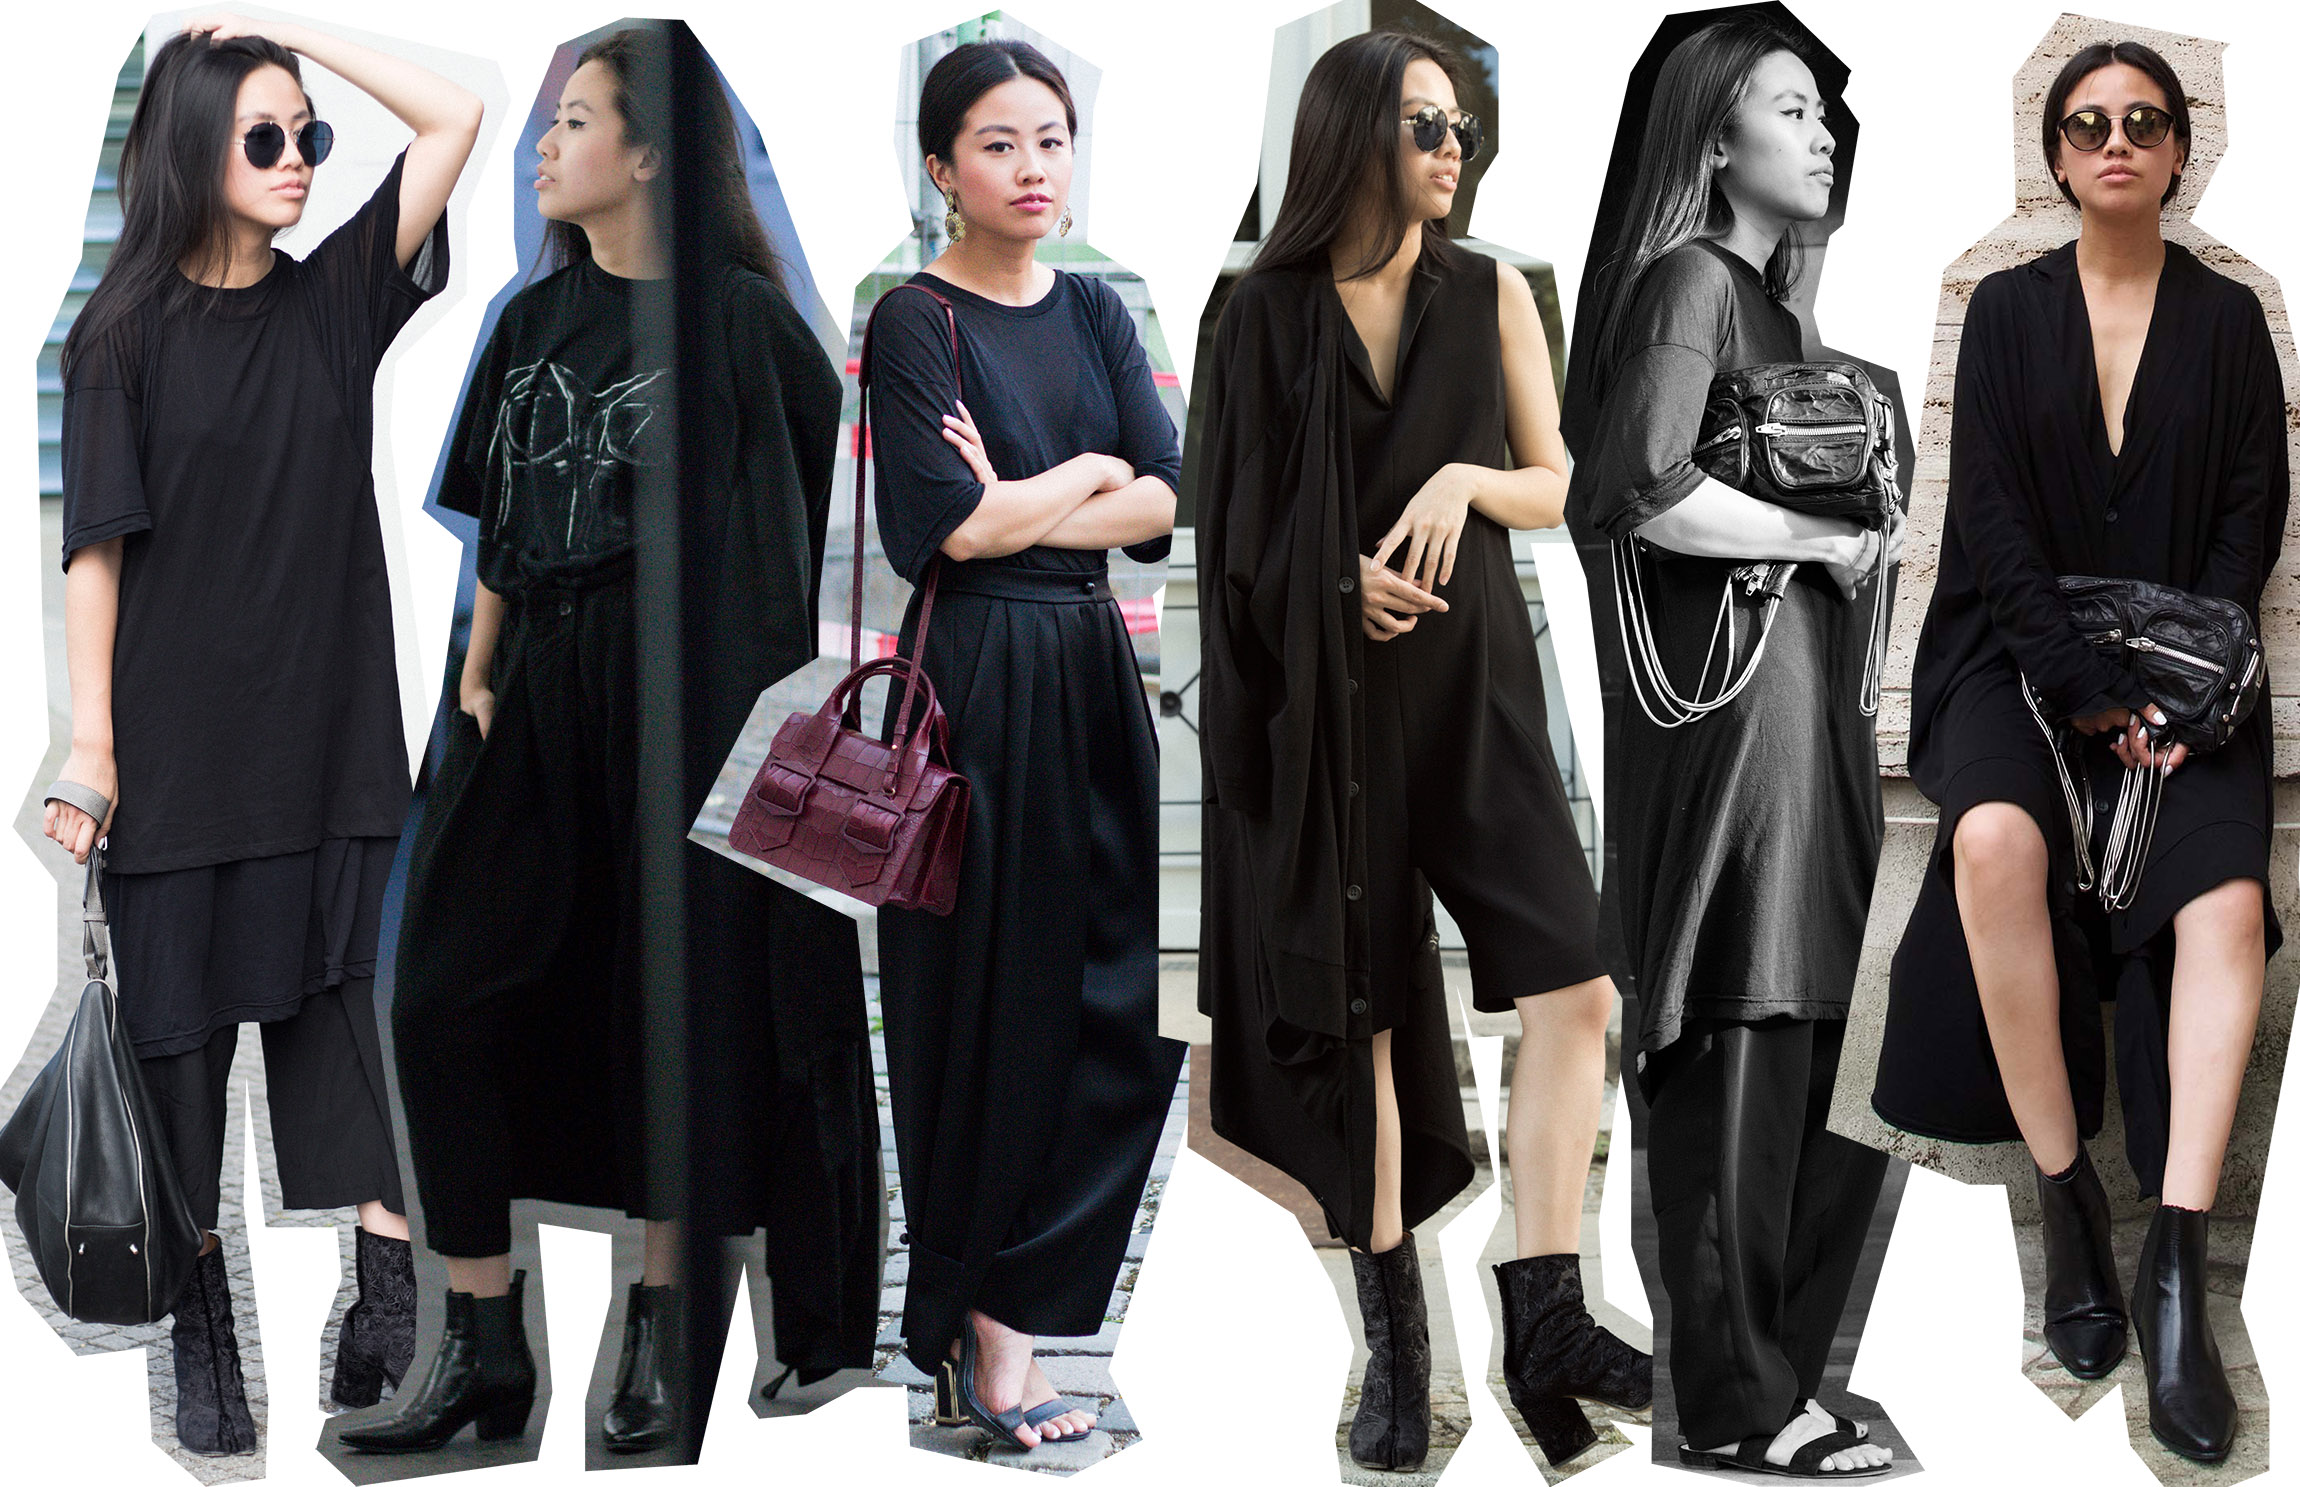 I HEART ALICE – Fashion and Travelblog from Berlin / Germany by Alice M. Huynh: Outfit Review of July 2015 wearing Emporio Armani, Yohji Yamamoto, Saint Laurent Paris. Maison Margiela, Alexander Wang...